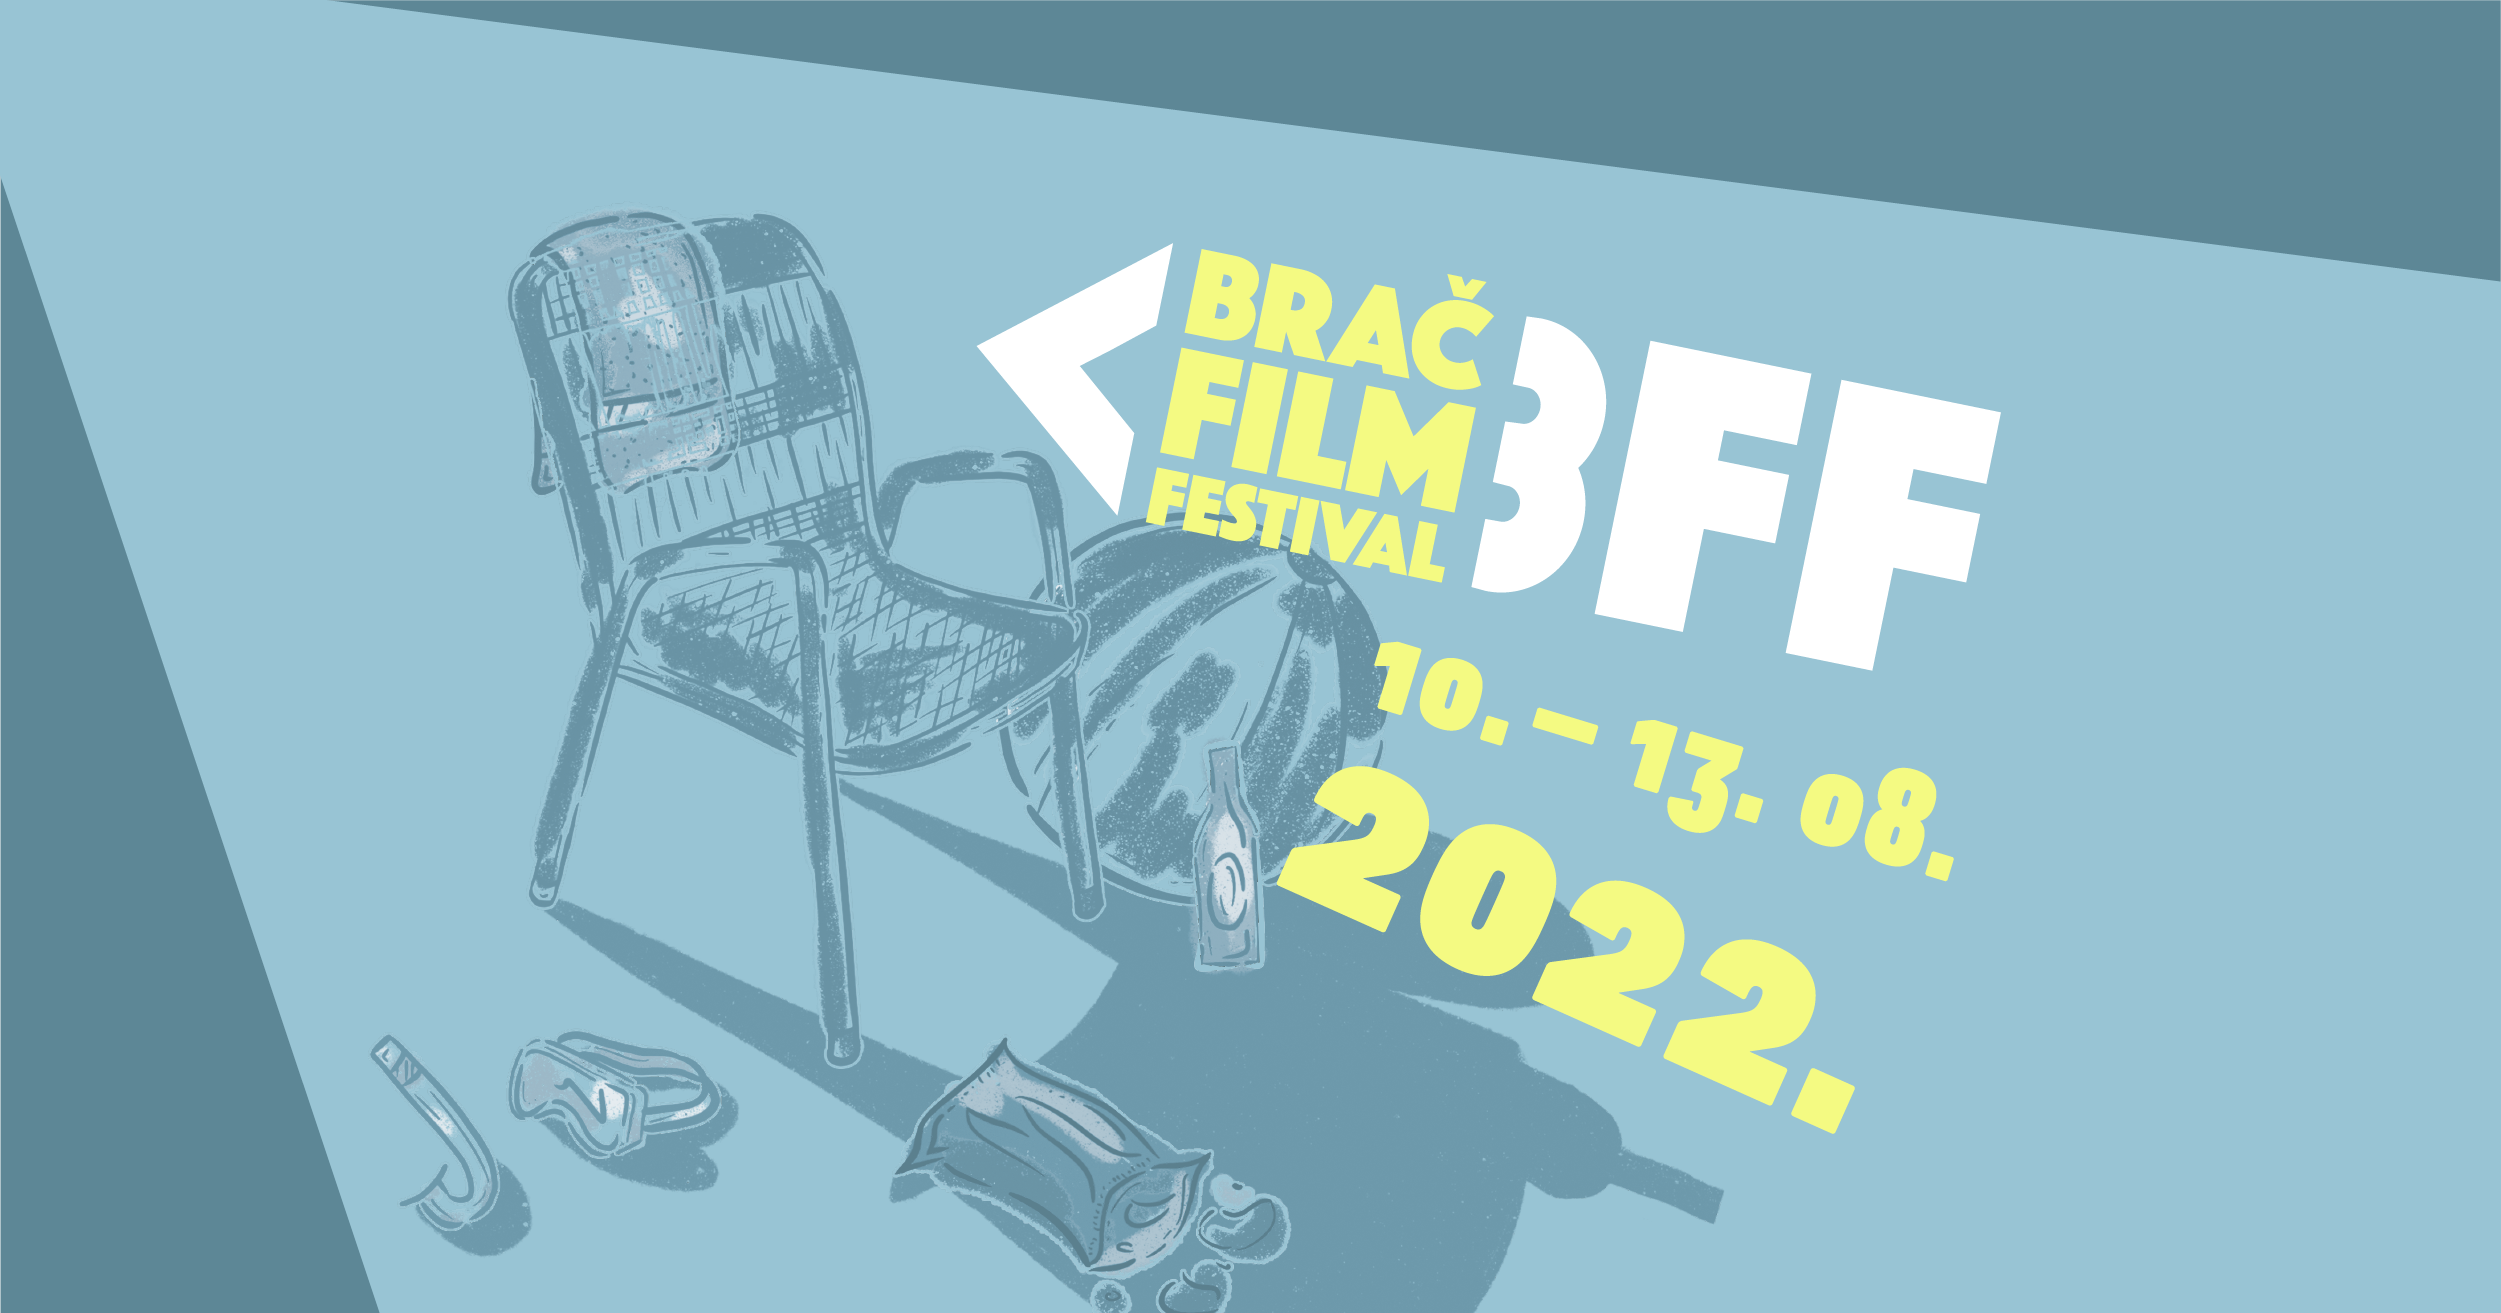 Excellent film titles in an island idyll: Here's what this year's edition of the Brač Film Festival brings